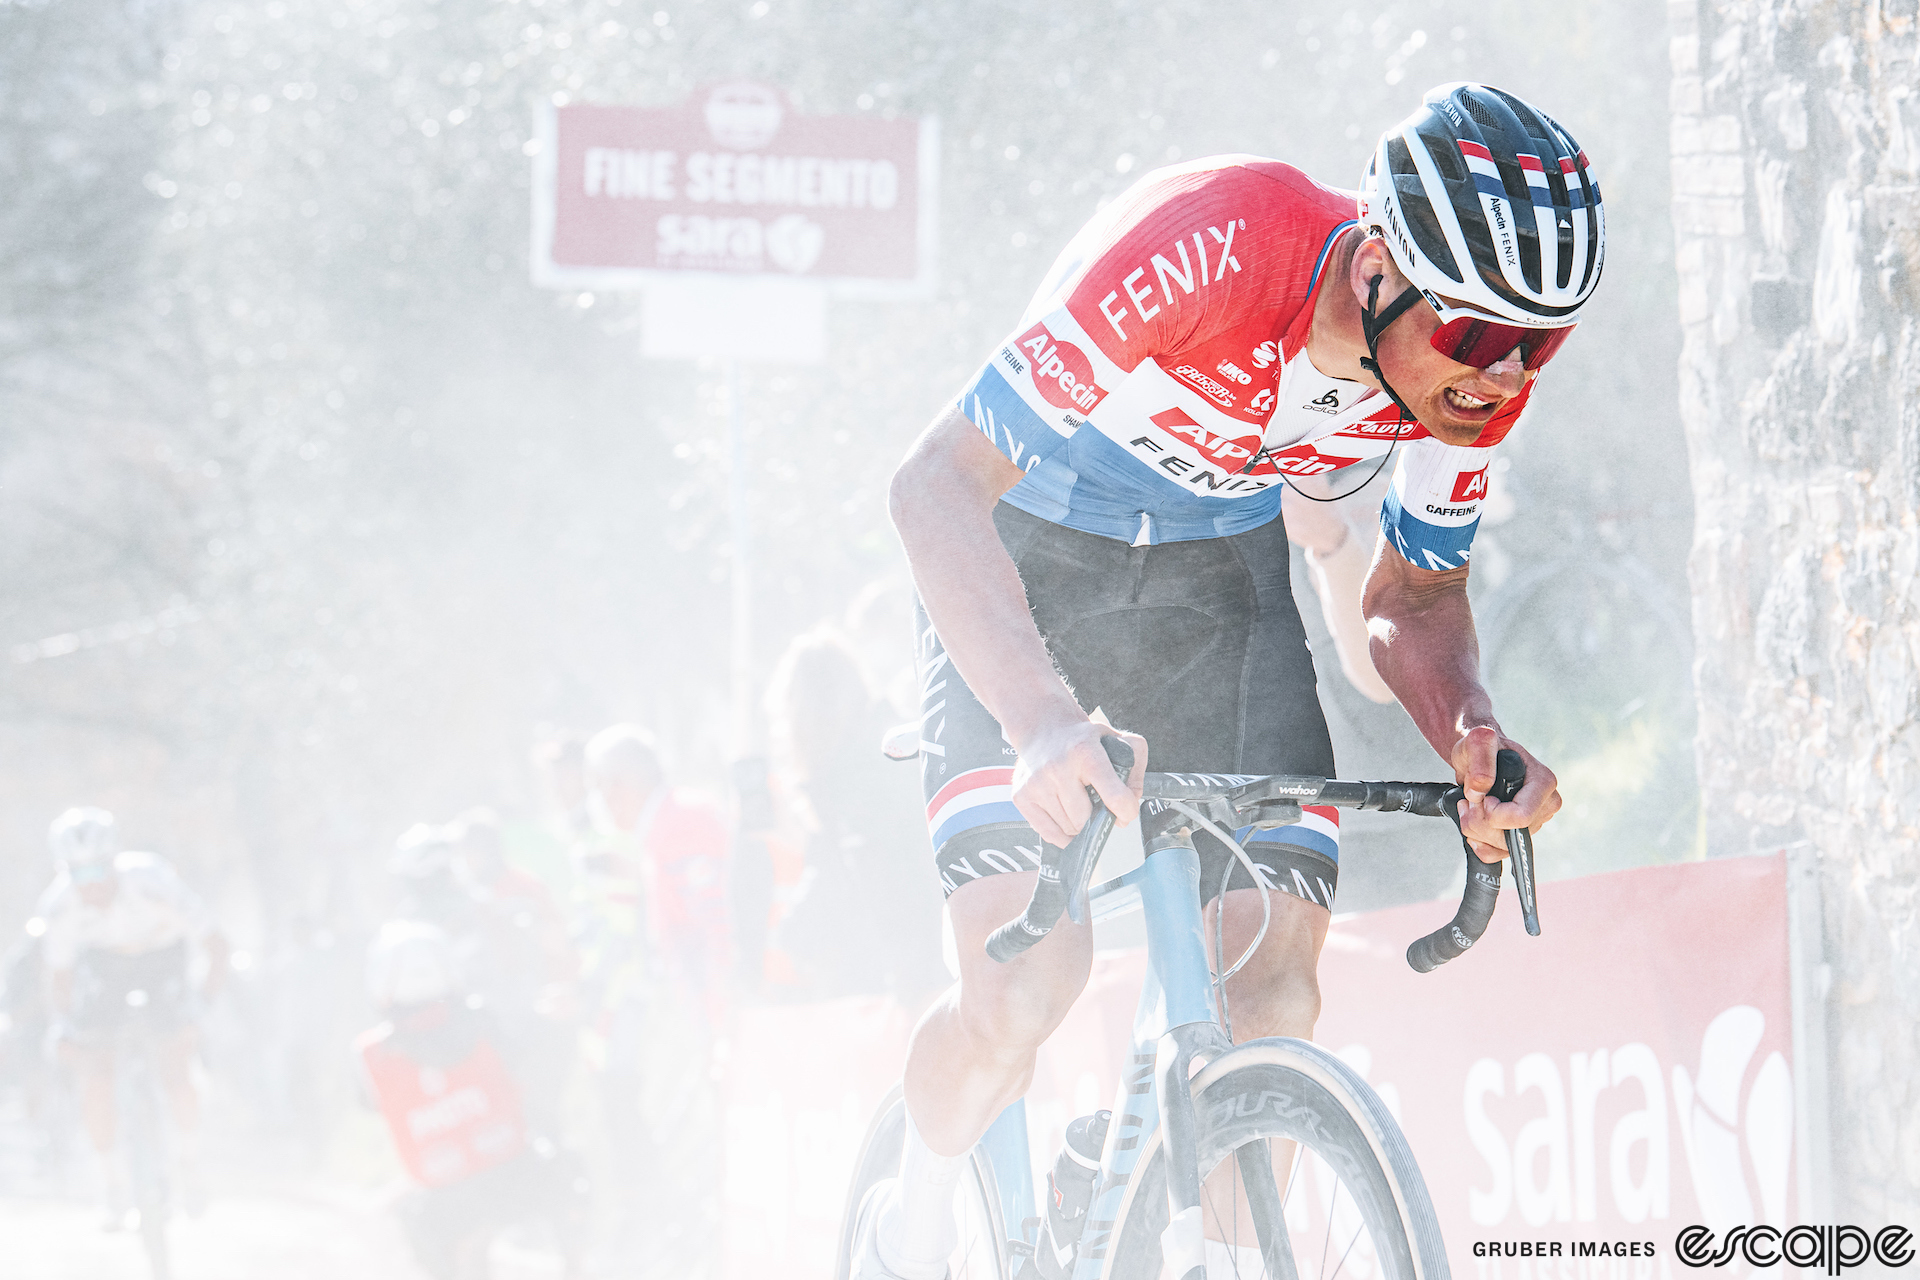 Mathieu van der Poel grimaces as he attacks out of the saddle on a late gravel sector in Strade Bianche. He's bent low over the bike, wearing the Dutch national champion's jersey in bands of red, white, and blue. White dust rises all around him.